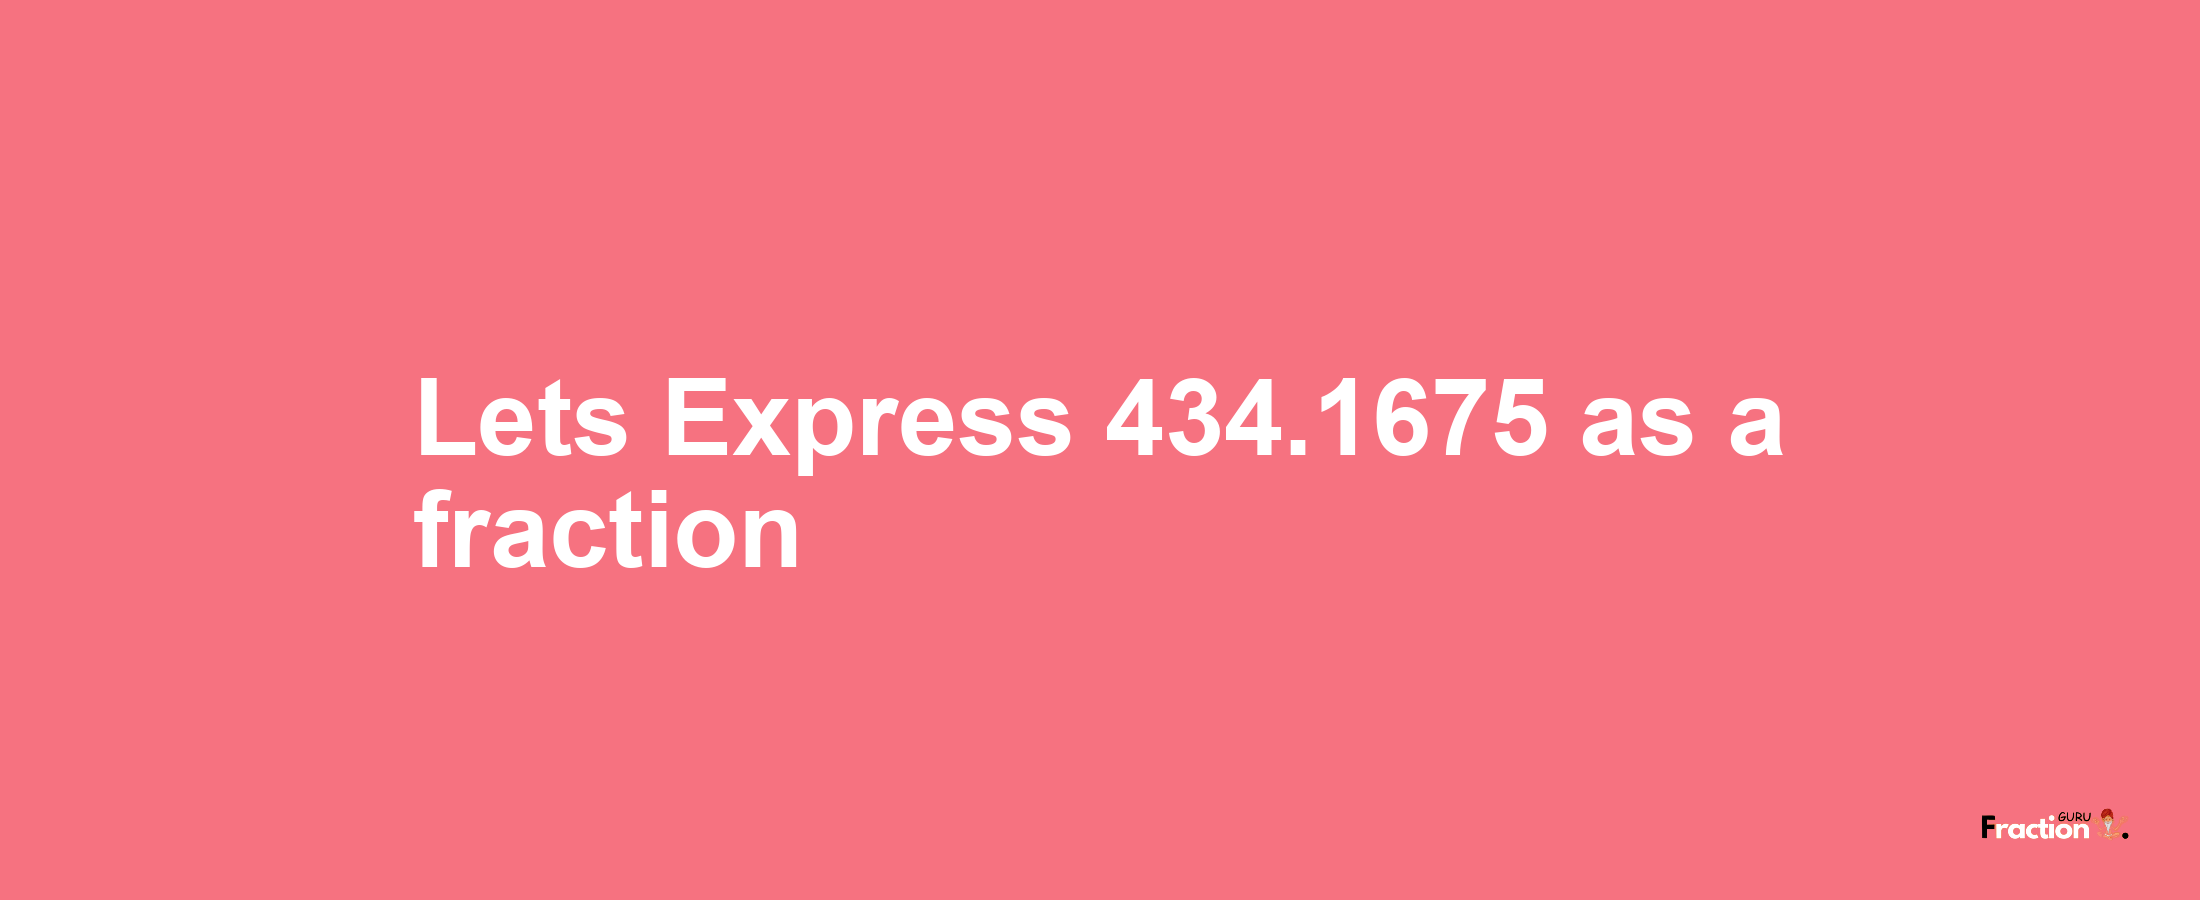 Lets Express 434.1675 as afraction